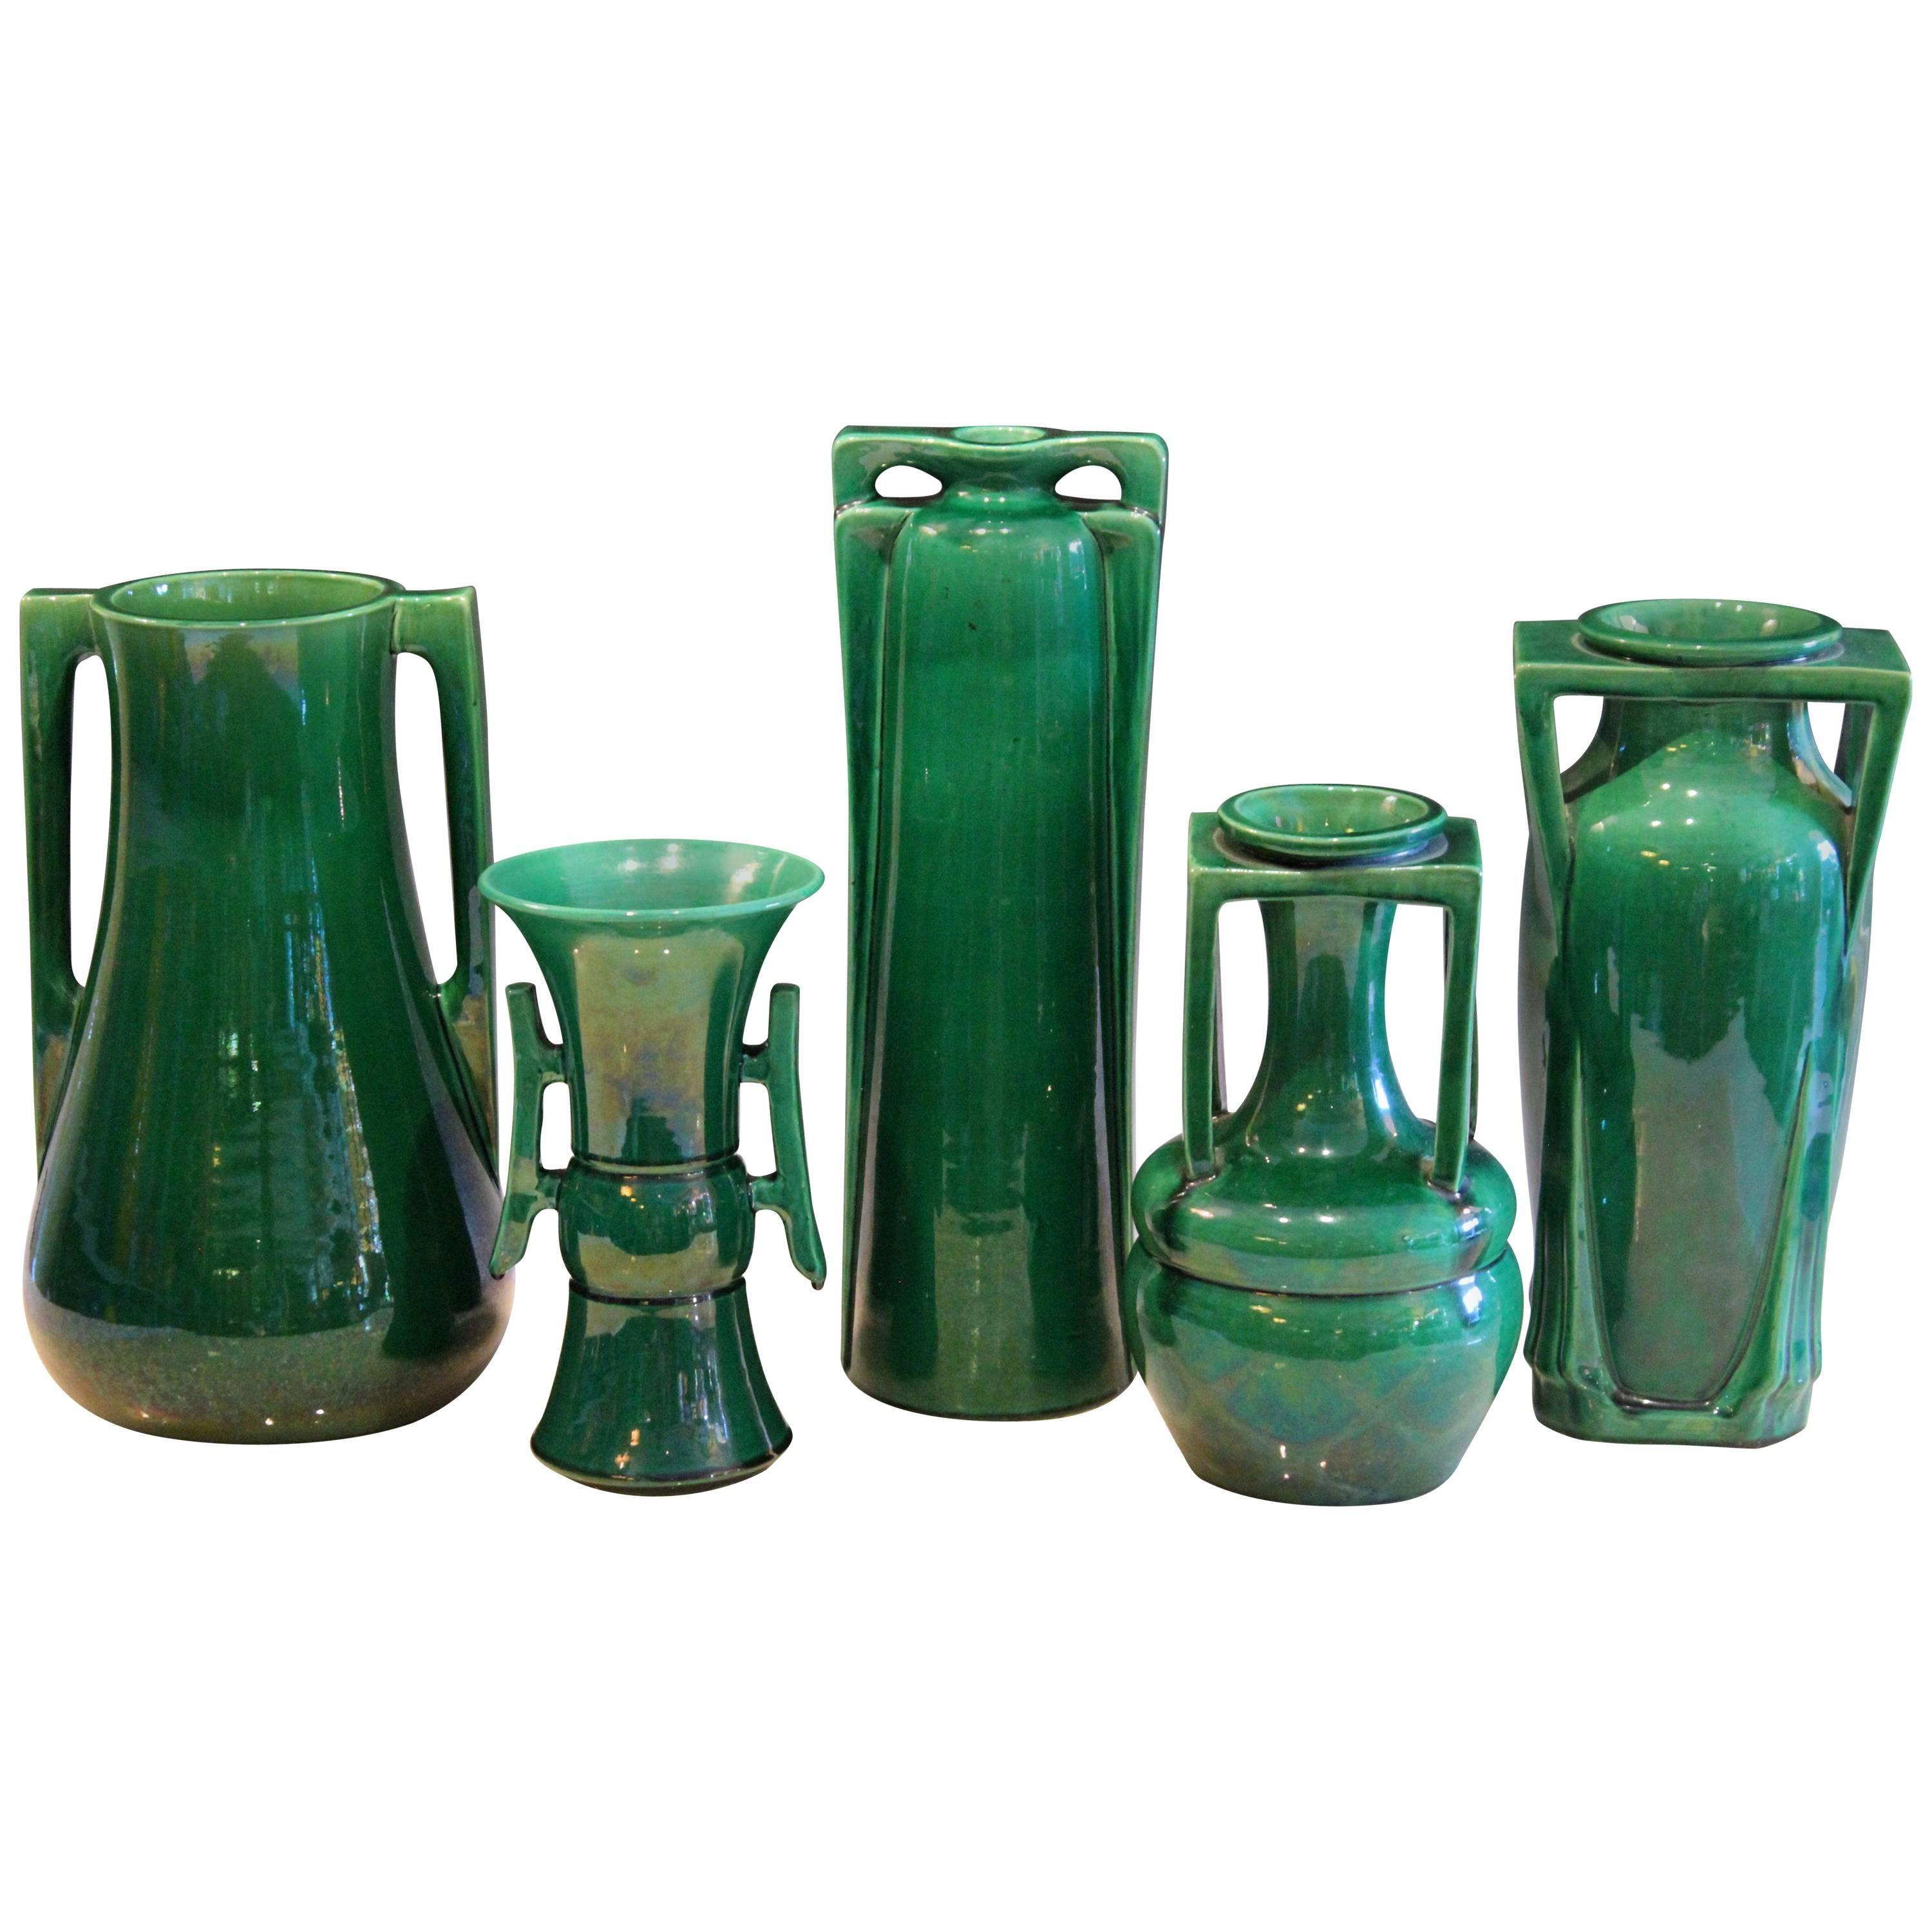 Awaji Pottery Art Deco Architectural Buttress Handled Vases, circa 1920